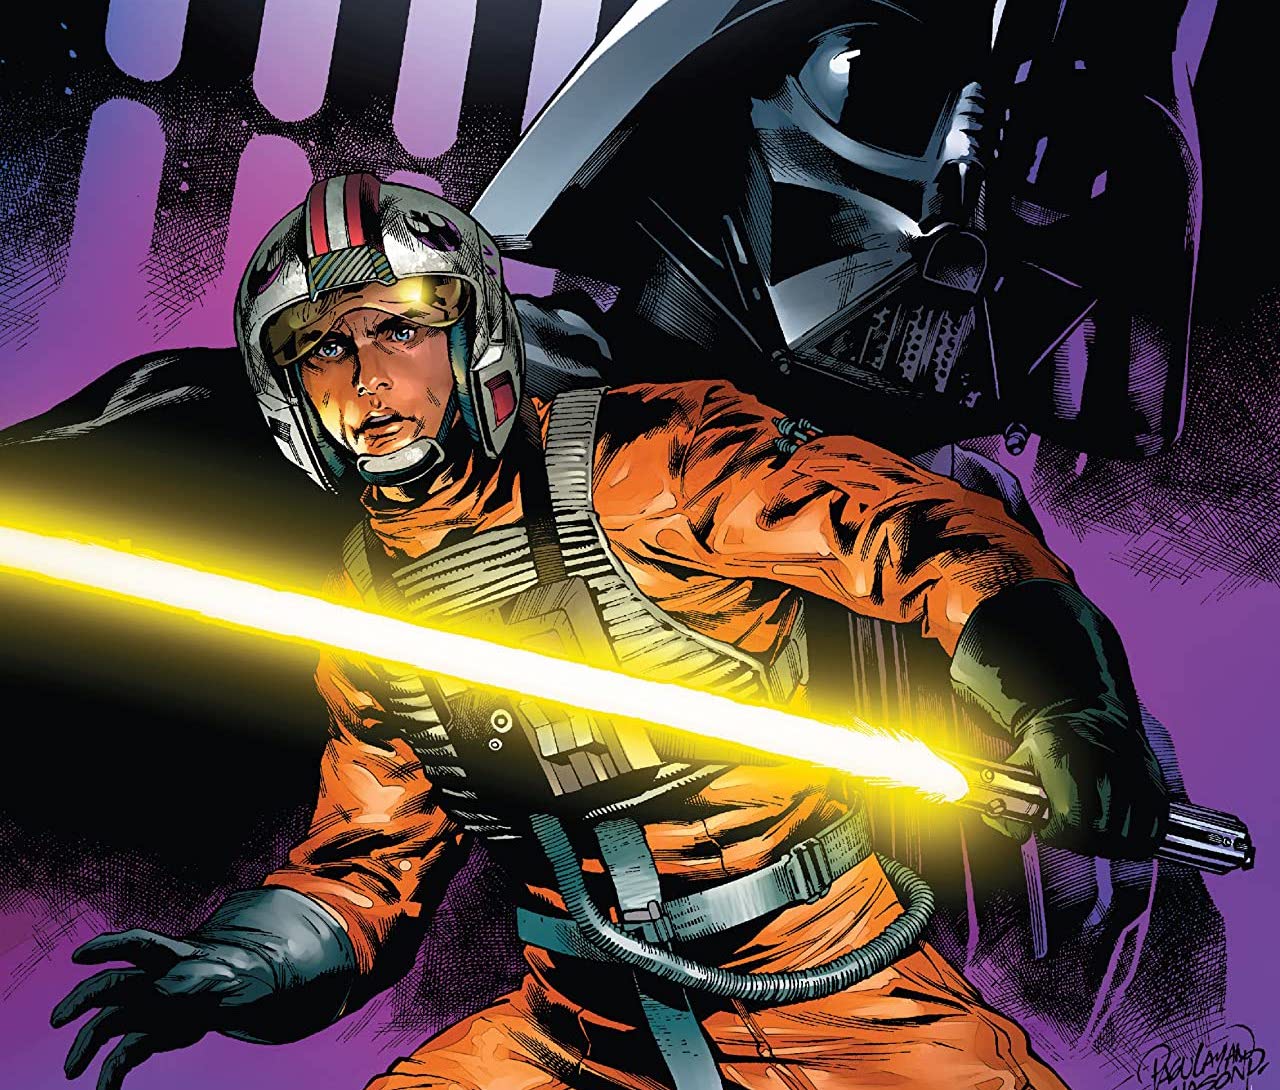 'Star Wars' #16 shows Luke Skywalker is not ready to face Darth Vader